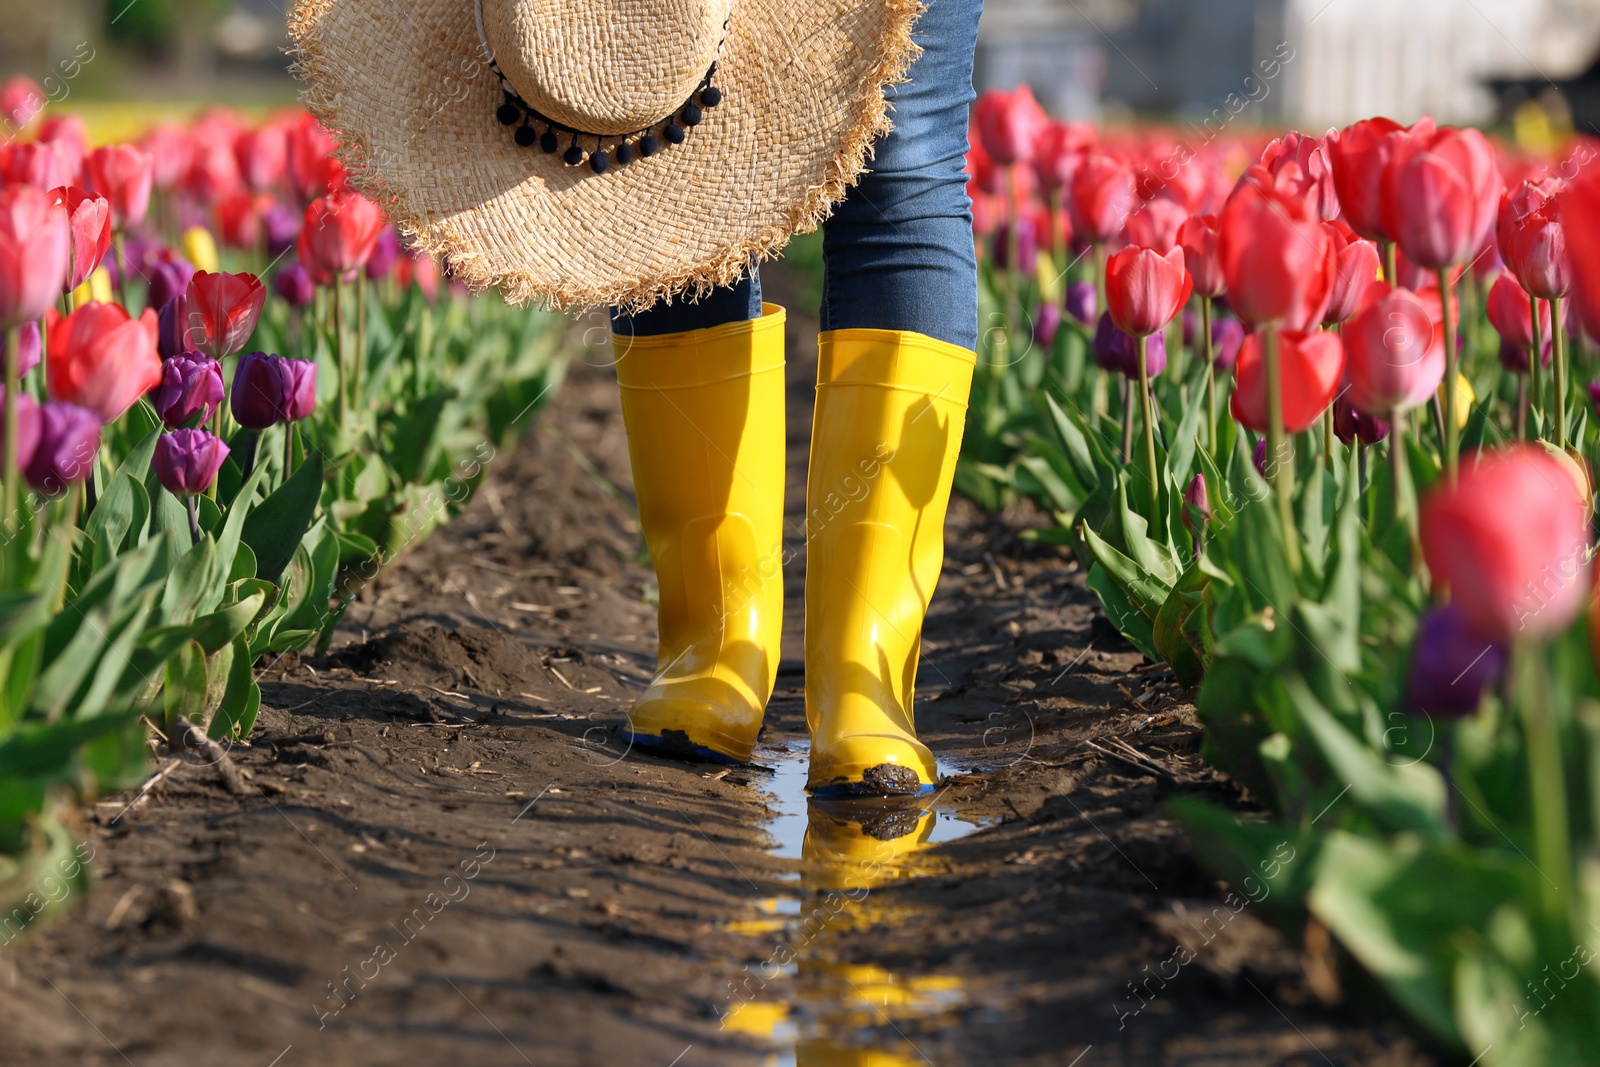 Photo of Woman in rubber boots walking across field with beautiful tulips after rain, closeup